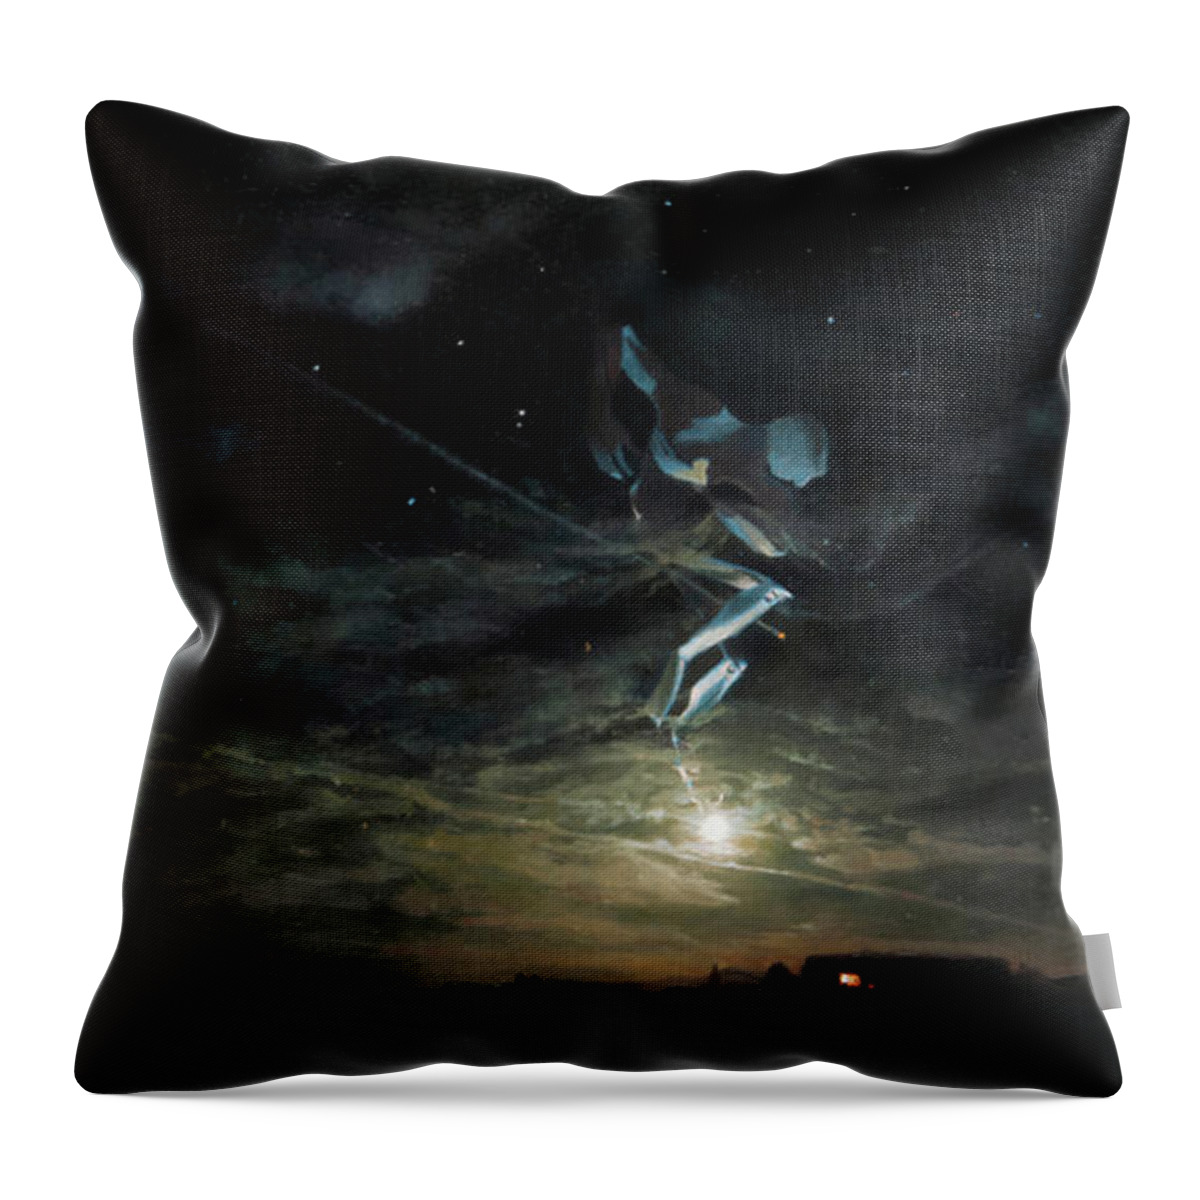 Nocturne Throw Pillow featuring the painting Nocturne by Guy Kinnear